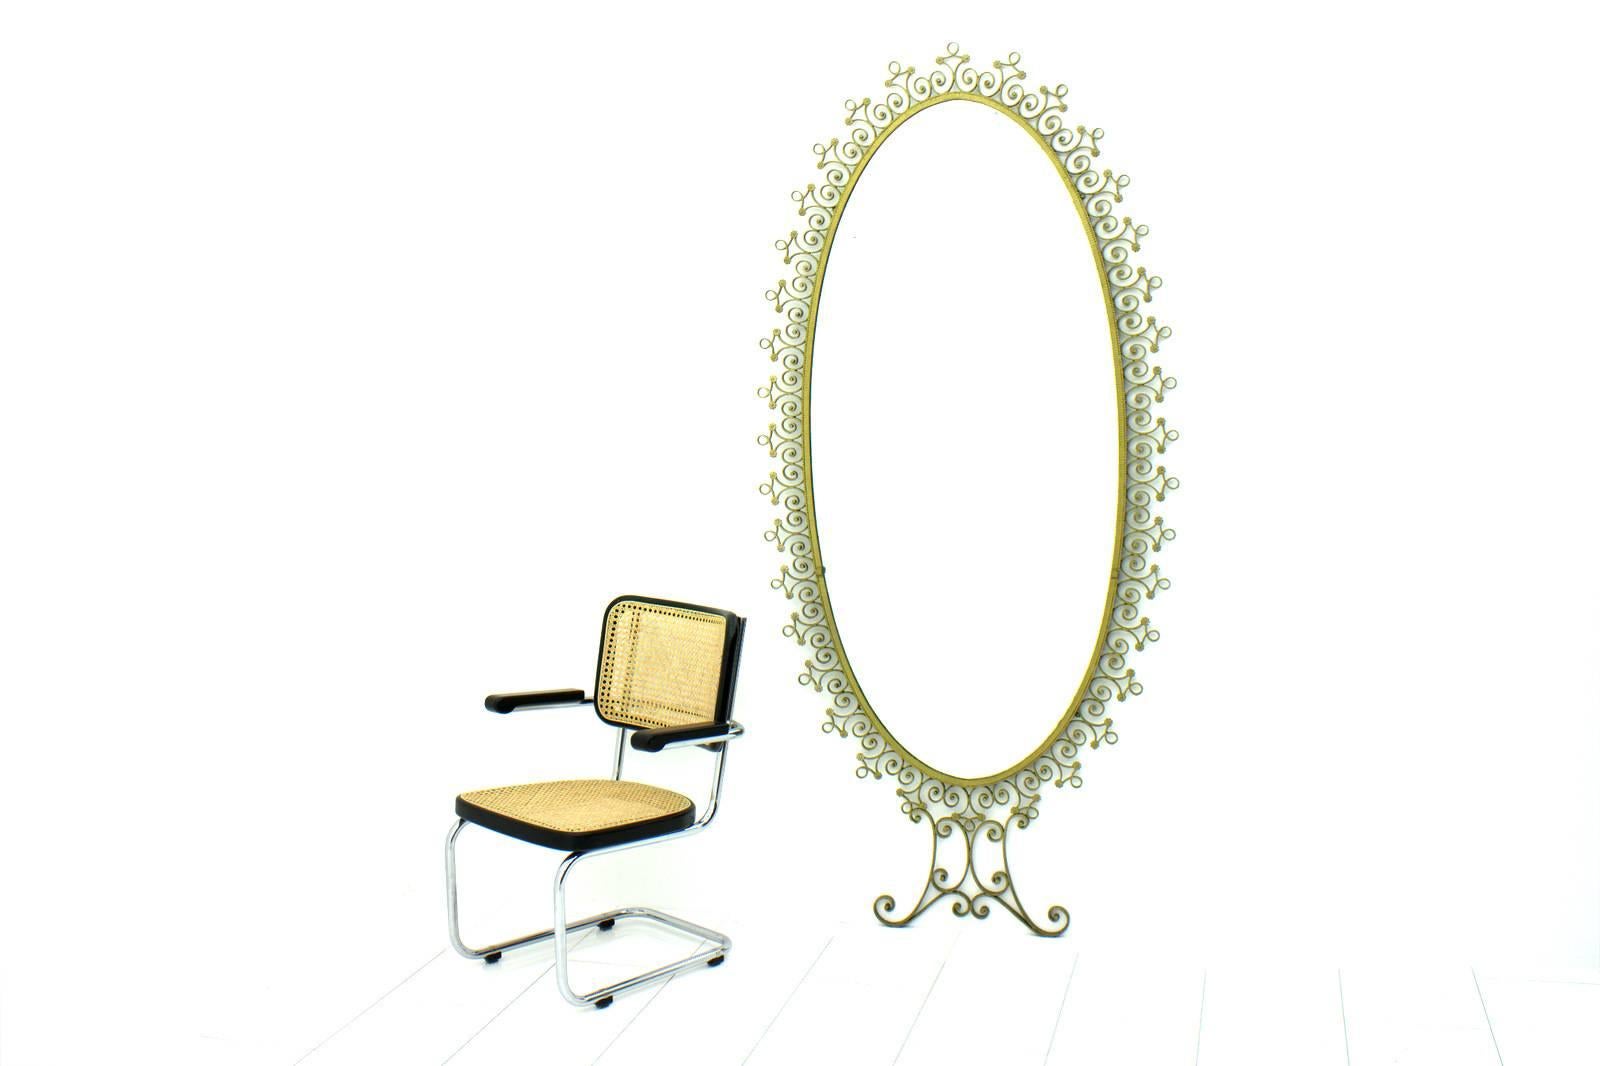 Large mirror attributed to Pierluigi Colli, Italy, 1950s. Good condition. Worldwide shipping.